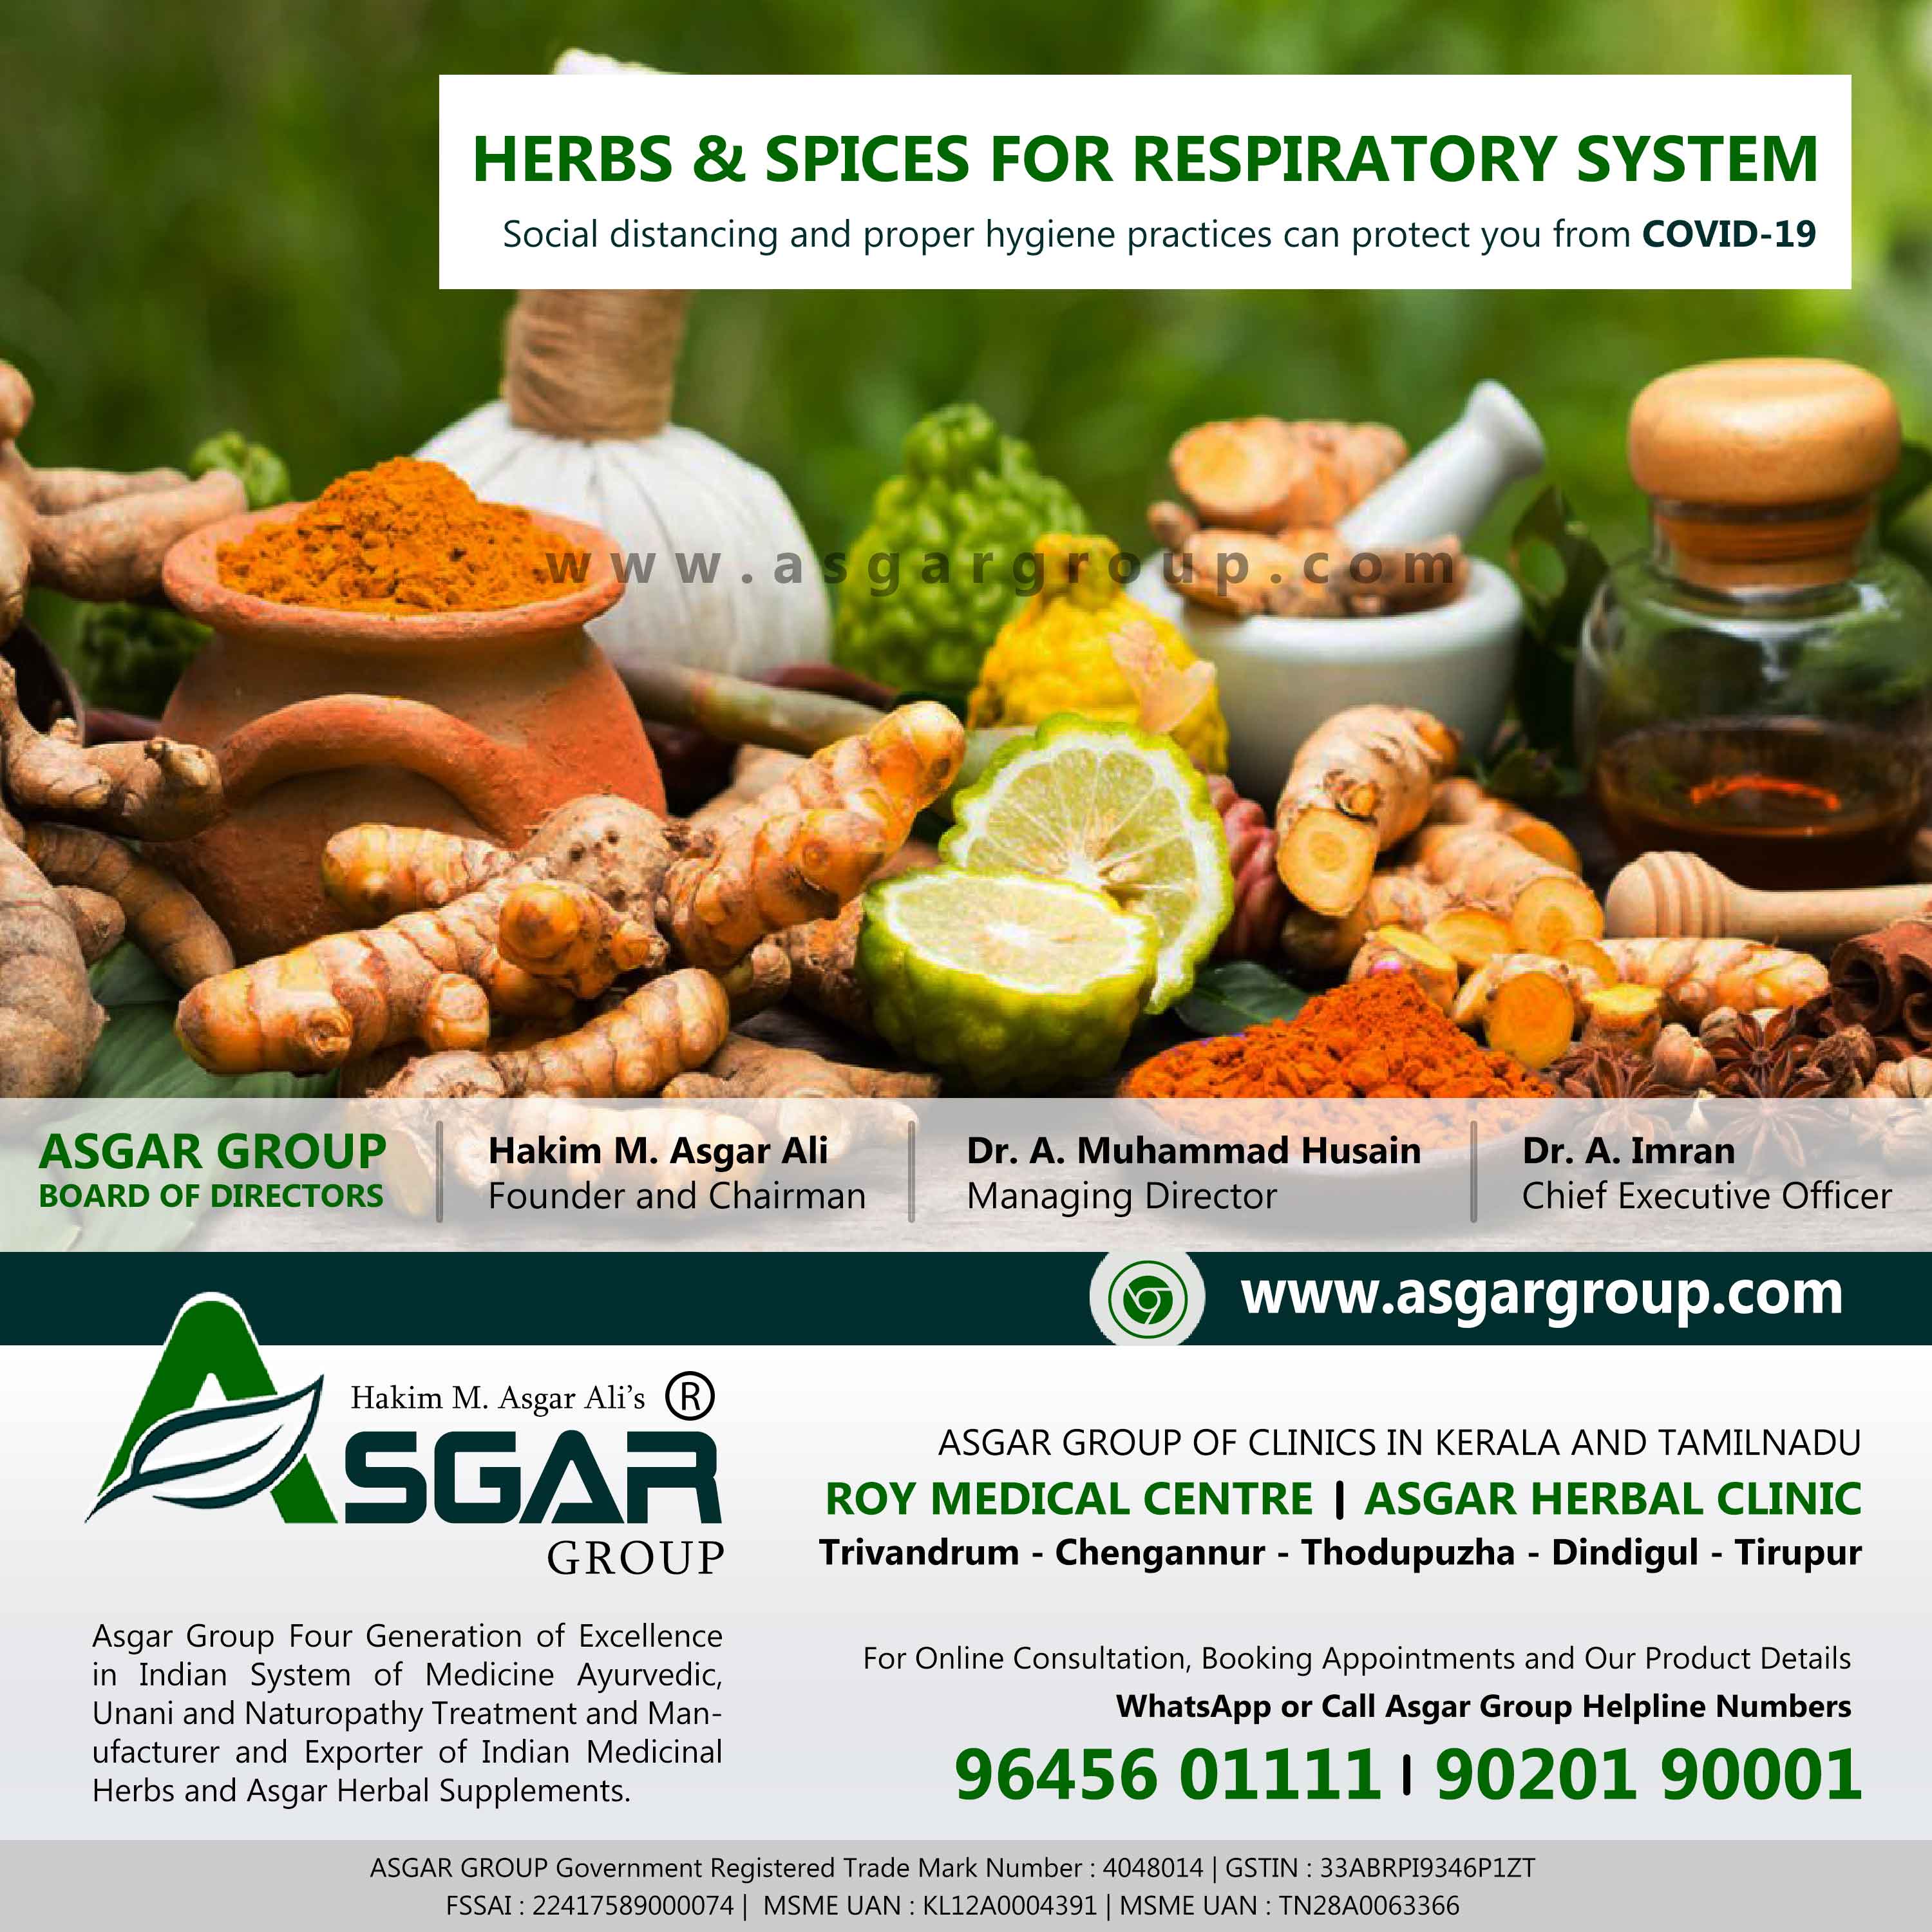 herbs and spices for respiratory system immunity booster covid 19 coronavirus asgargroup INDIA